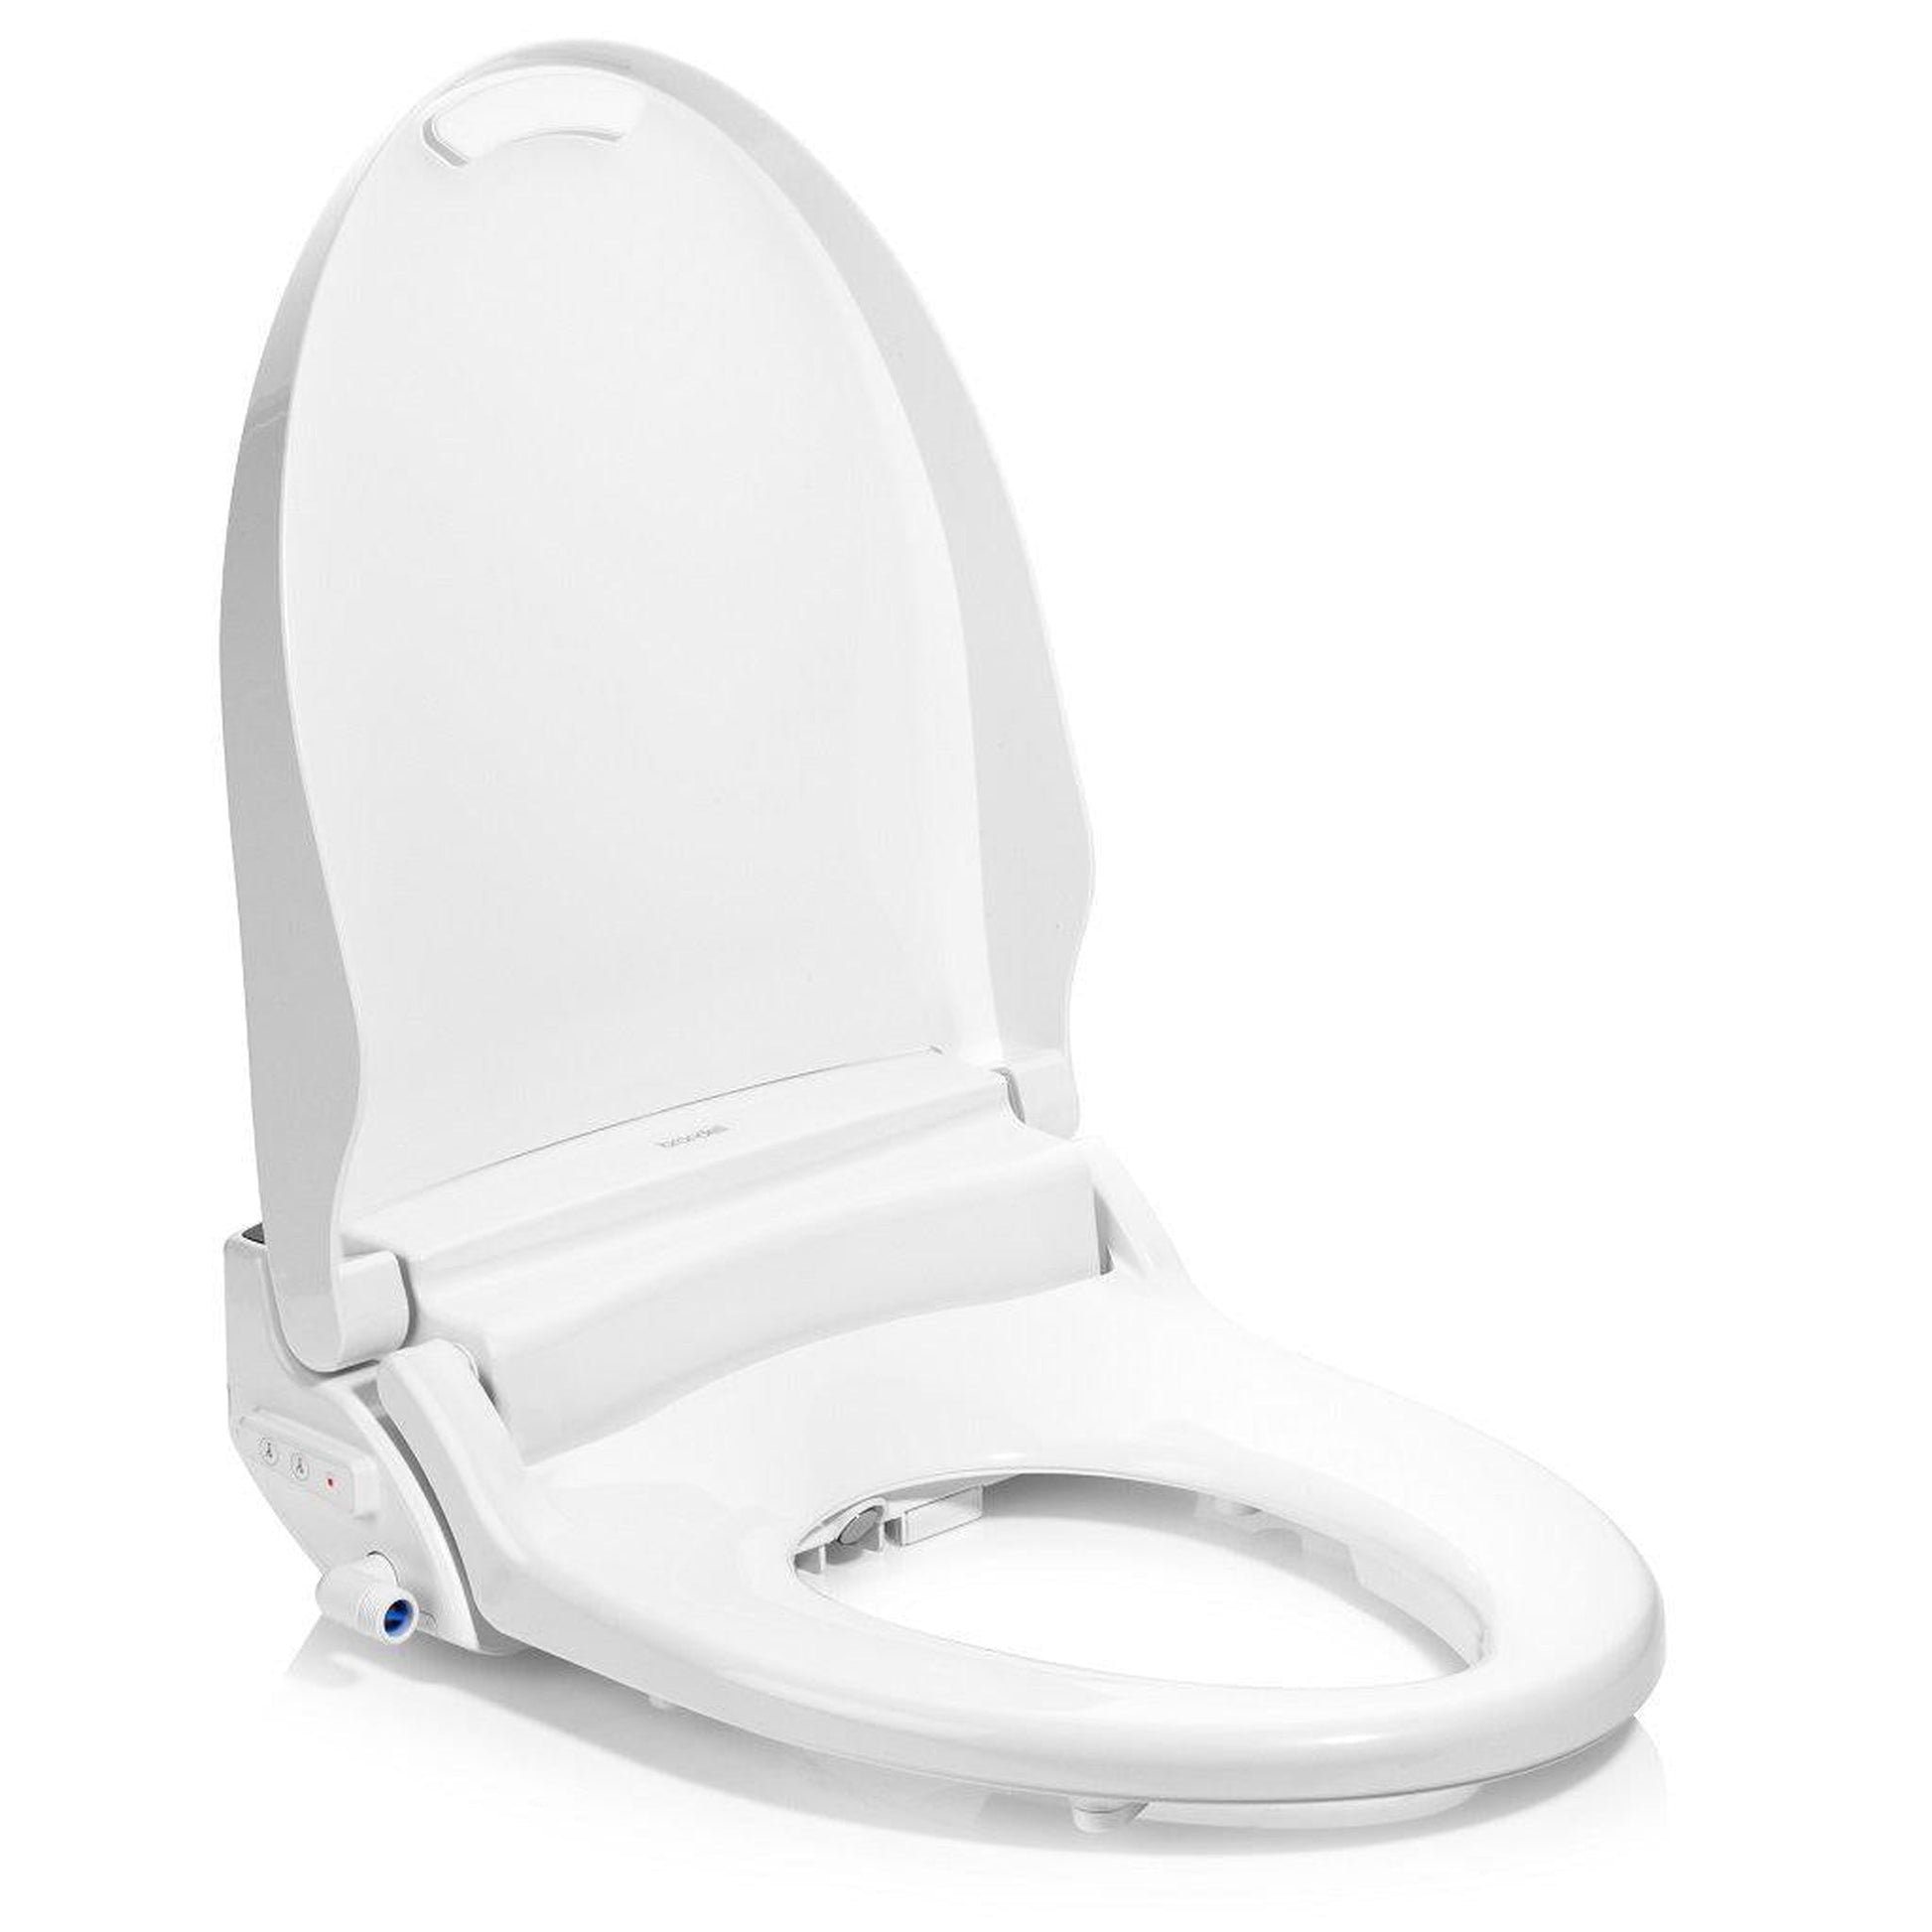 Brondell Swash Select EM617 20.7" White Elongated Electric Advanced Bidet Toilet Seat With Wireless Remote Control